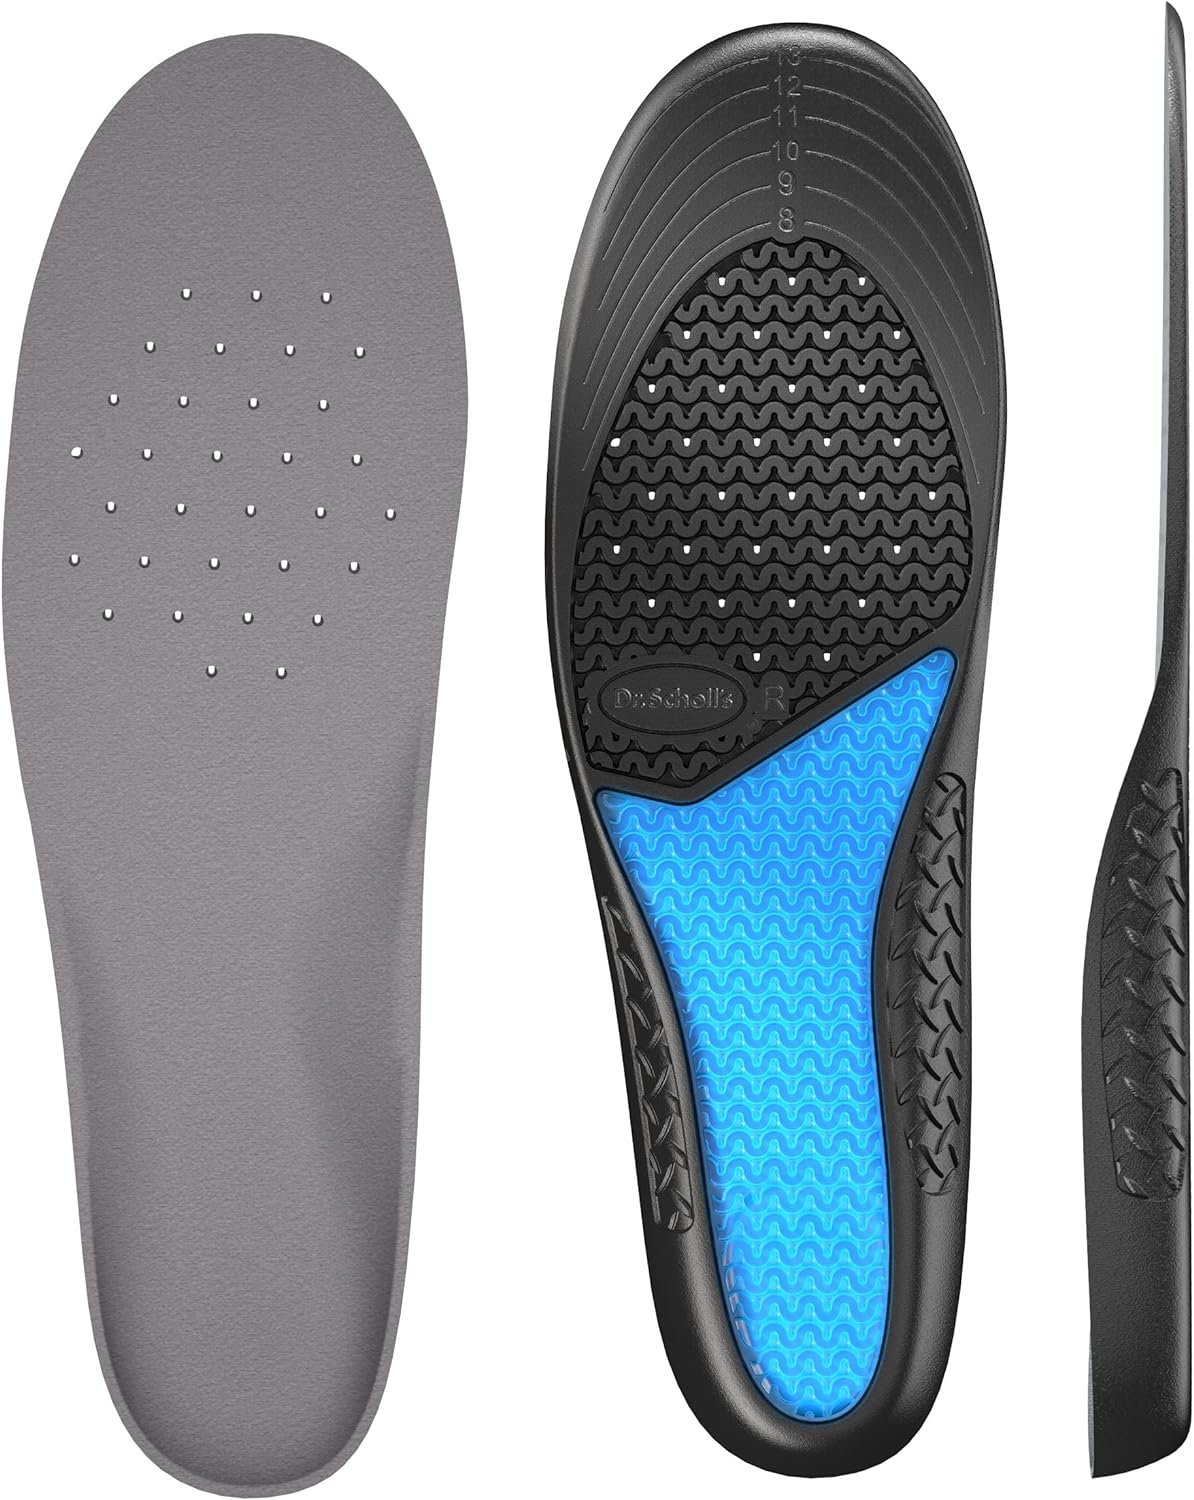 Dr. Scholls Work Insoles (Pack) // All-Day Shock Absorption and Reinforced Arch Support That Fits in Work Boots and More (for Mens 8-14, Also Available for Womens 6-10) 1 Pair (Pack of 2) 2 Count